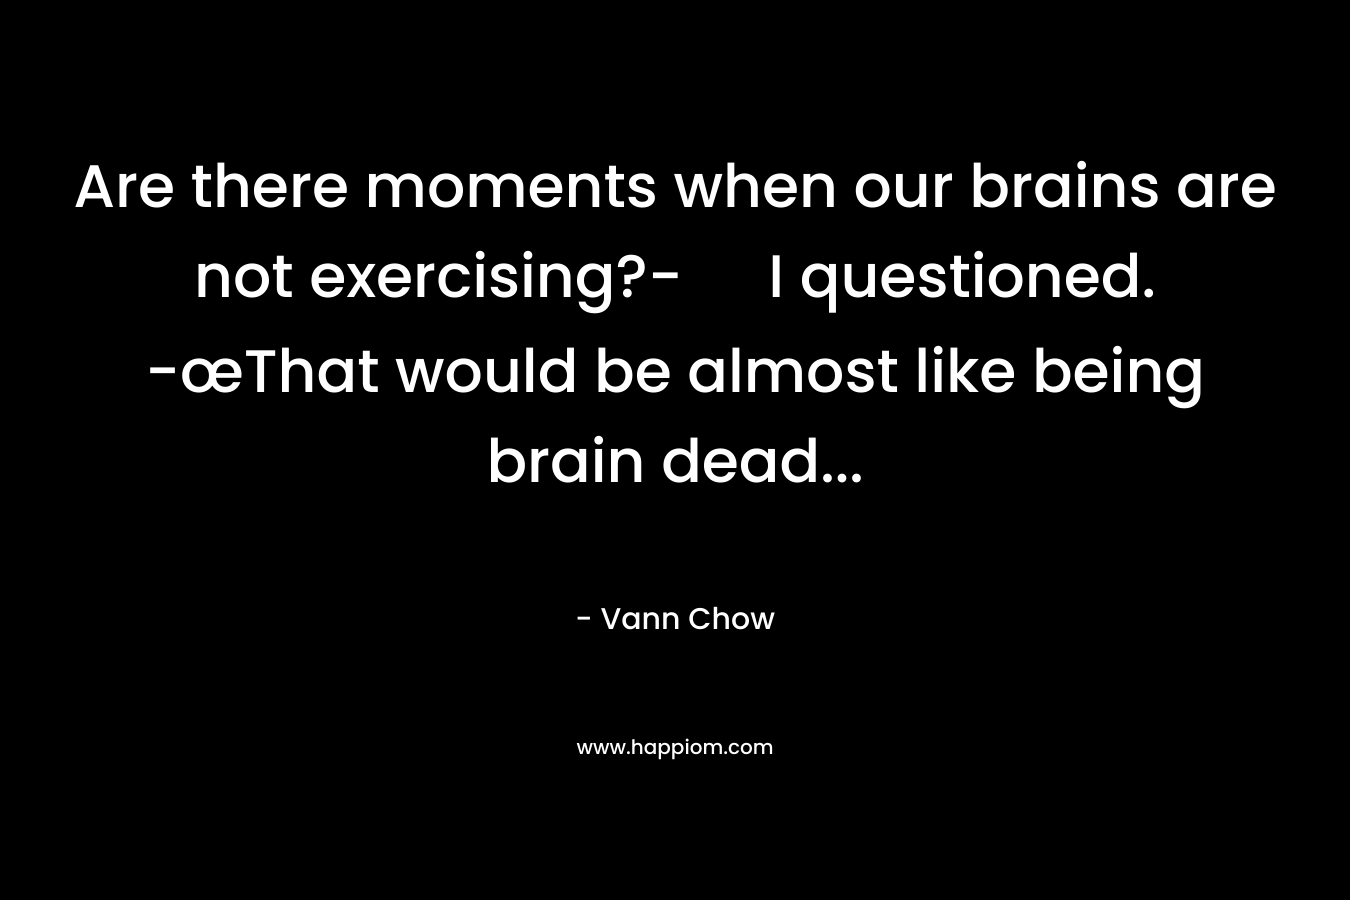 Are there moments when our brains are not exercising?- I questioned. -œThat would be almost like being brain dead...